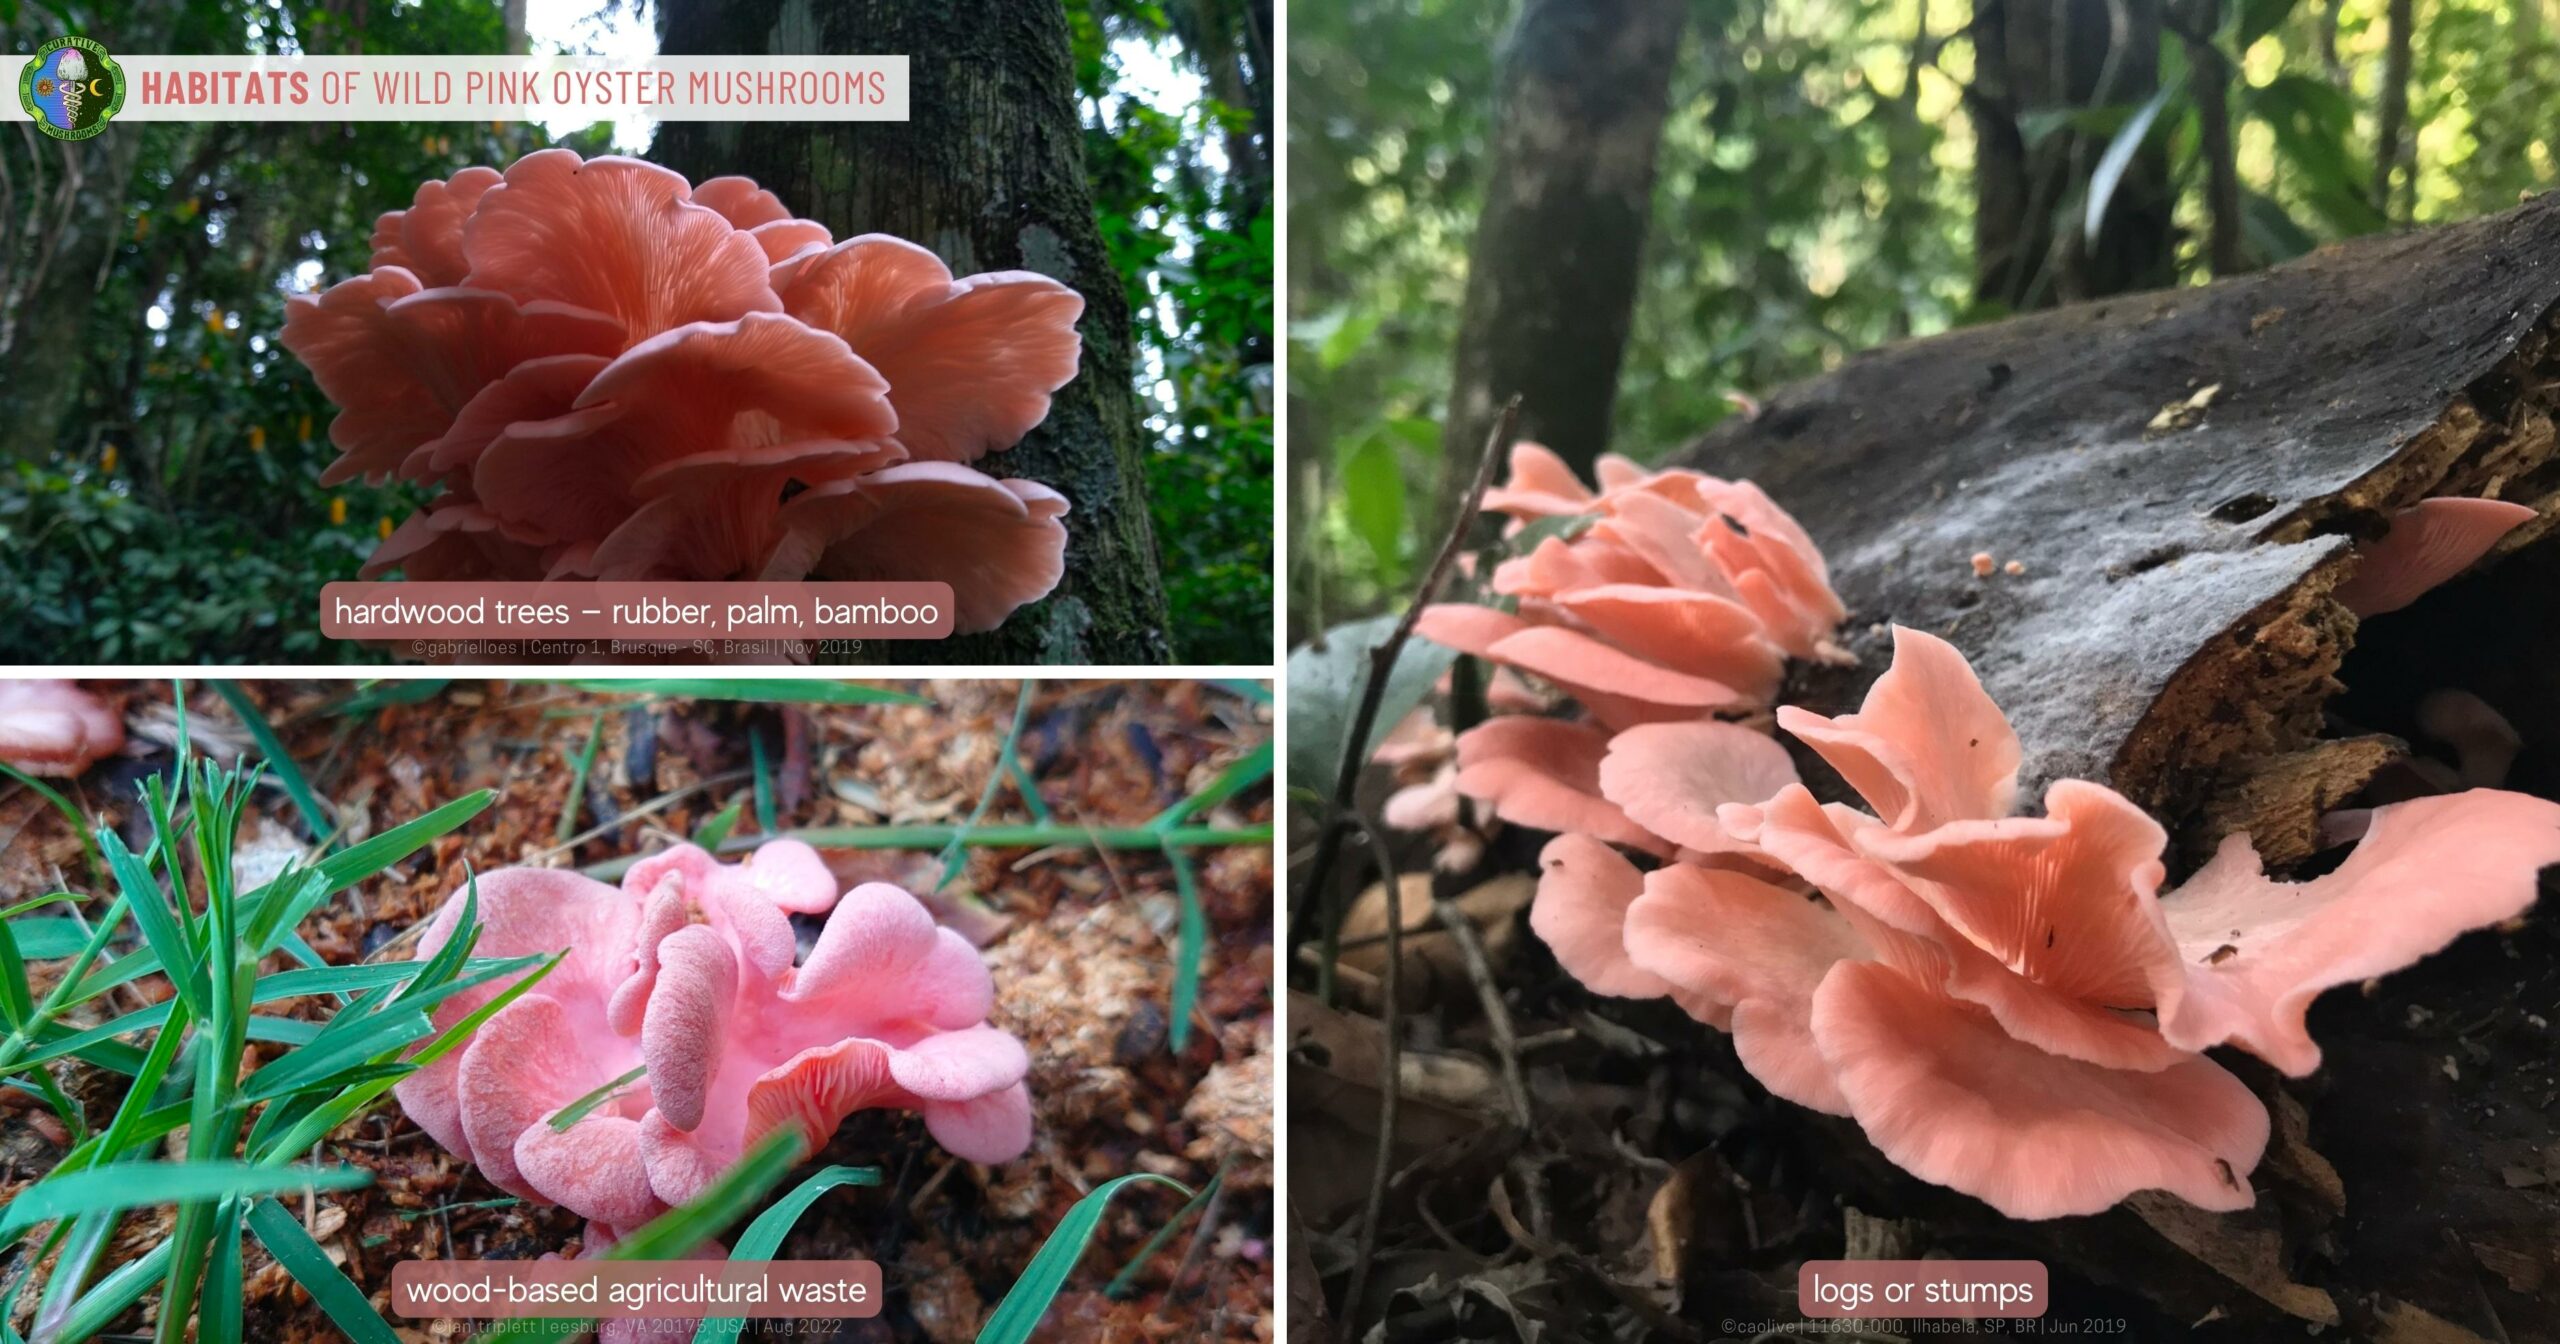 Habitats of Wild Pink Oyster Mushrooms - hardwood trees rubber, palm, bamboo - wood-based agricultural waste - logs or stumps